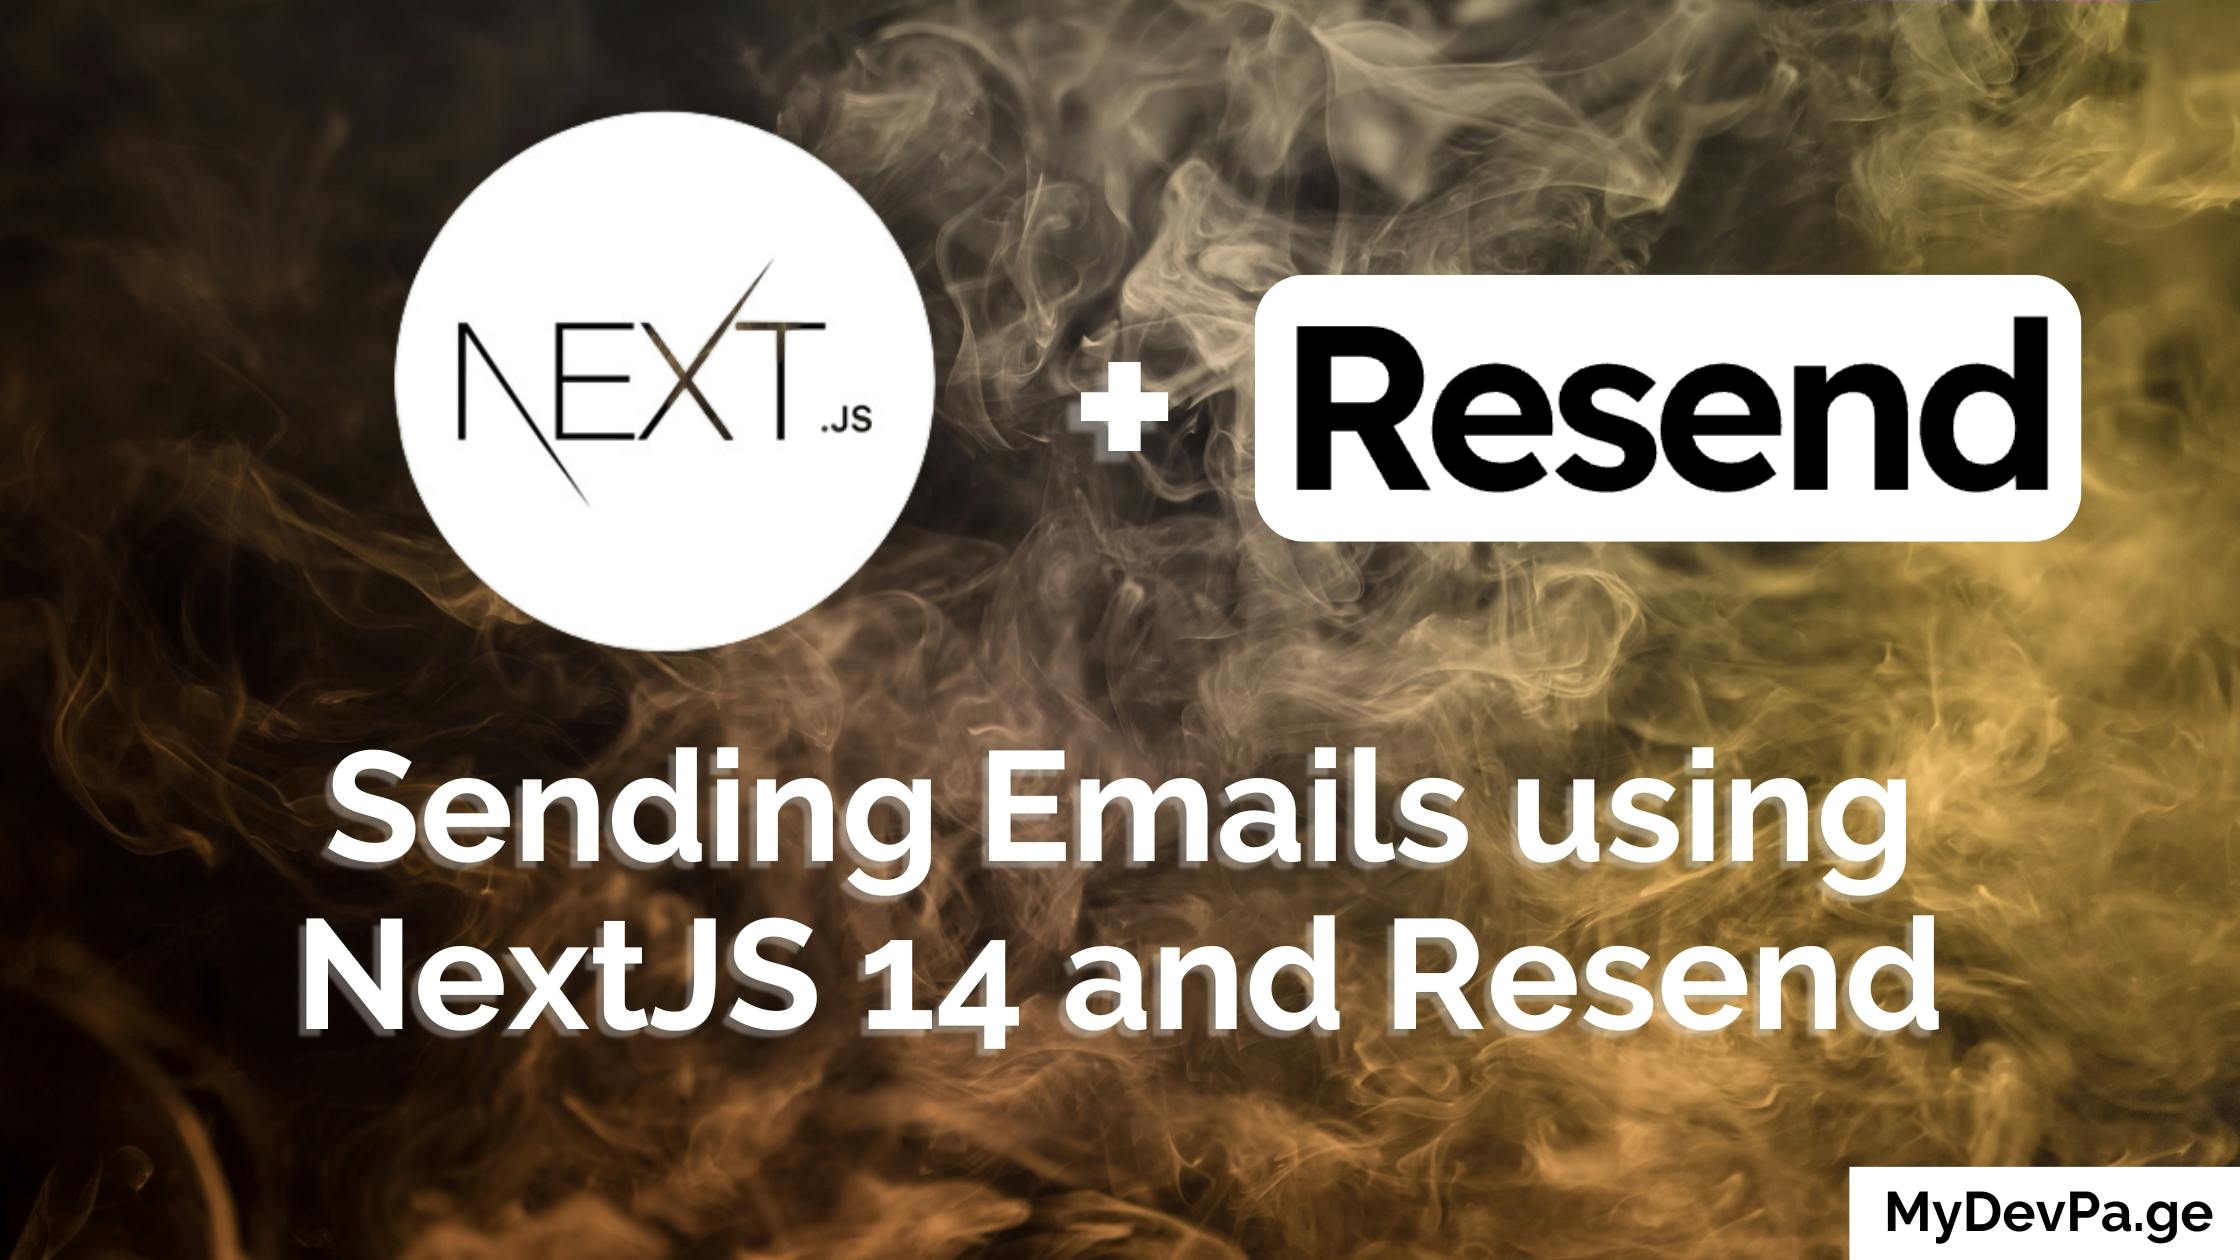 How to send emails using Next.js 14, Resend and React-Email